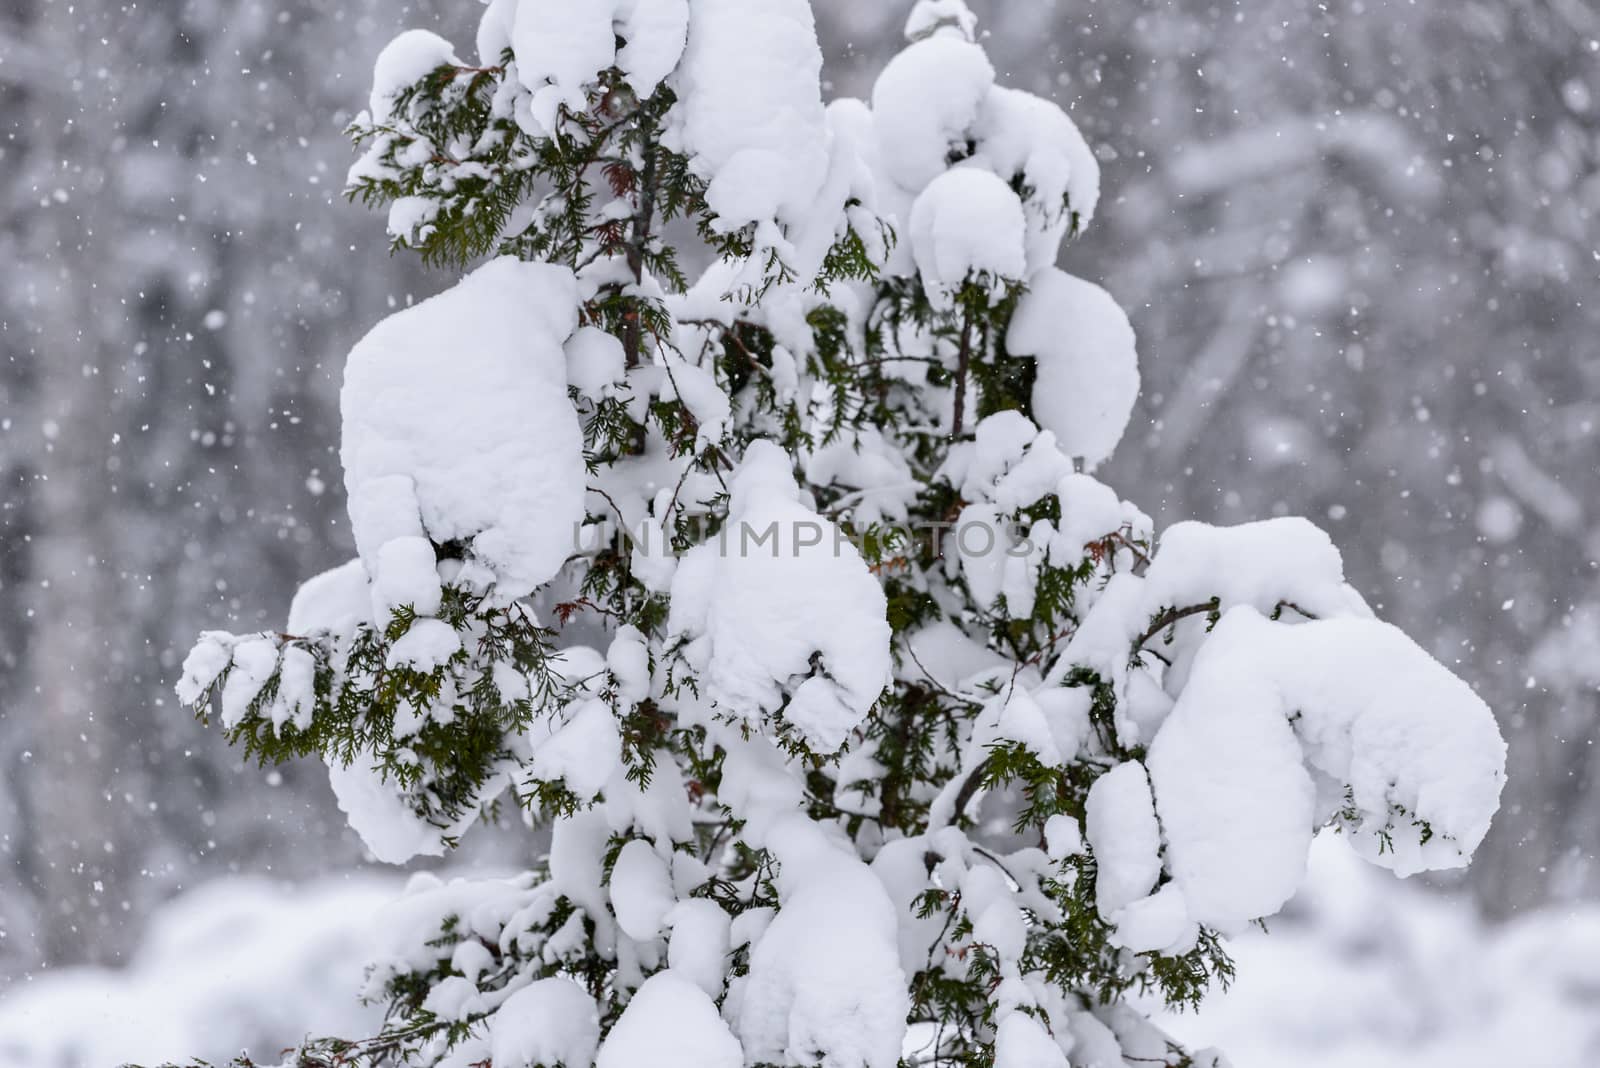 The tree has covered with heavy snow in winter season at Lapland, Finland.